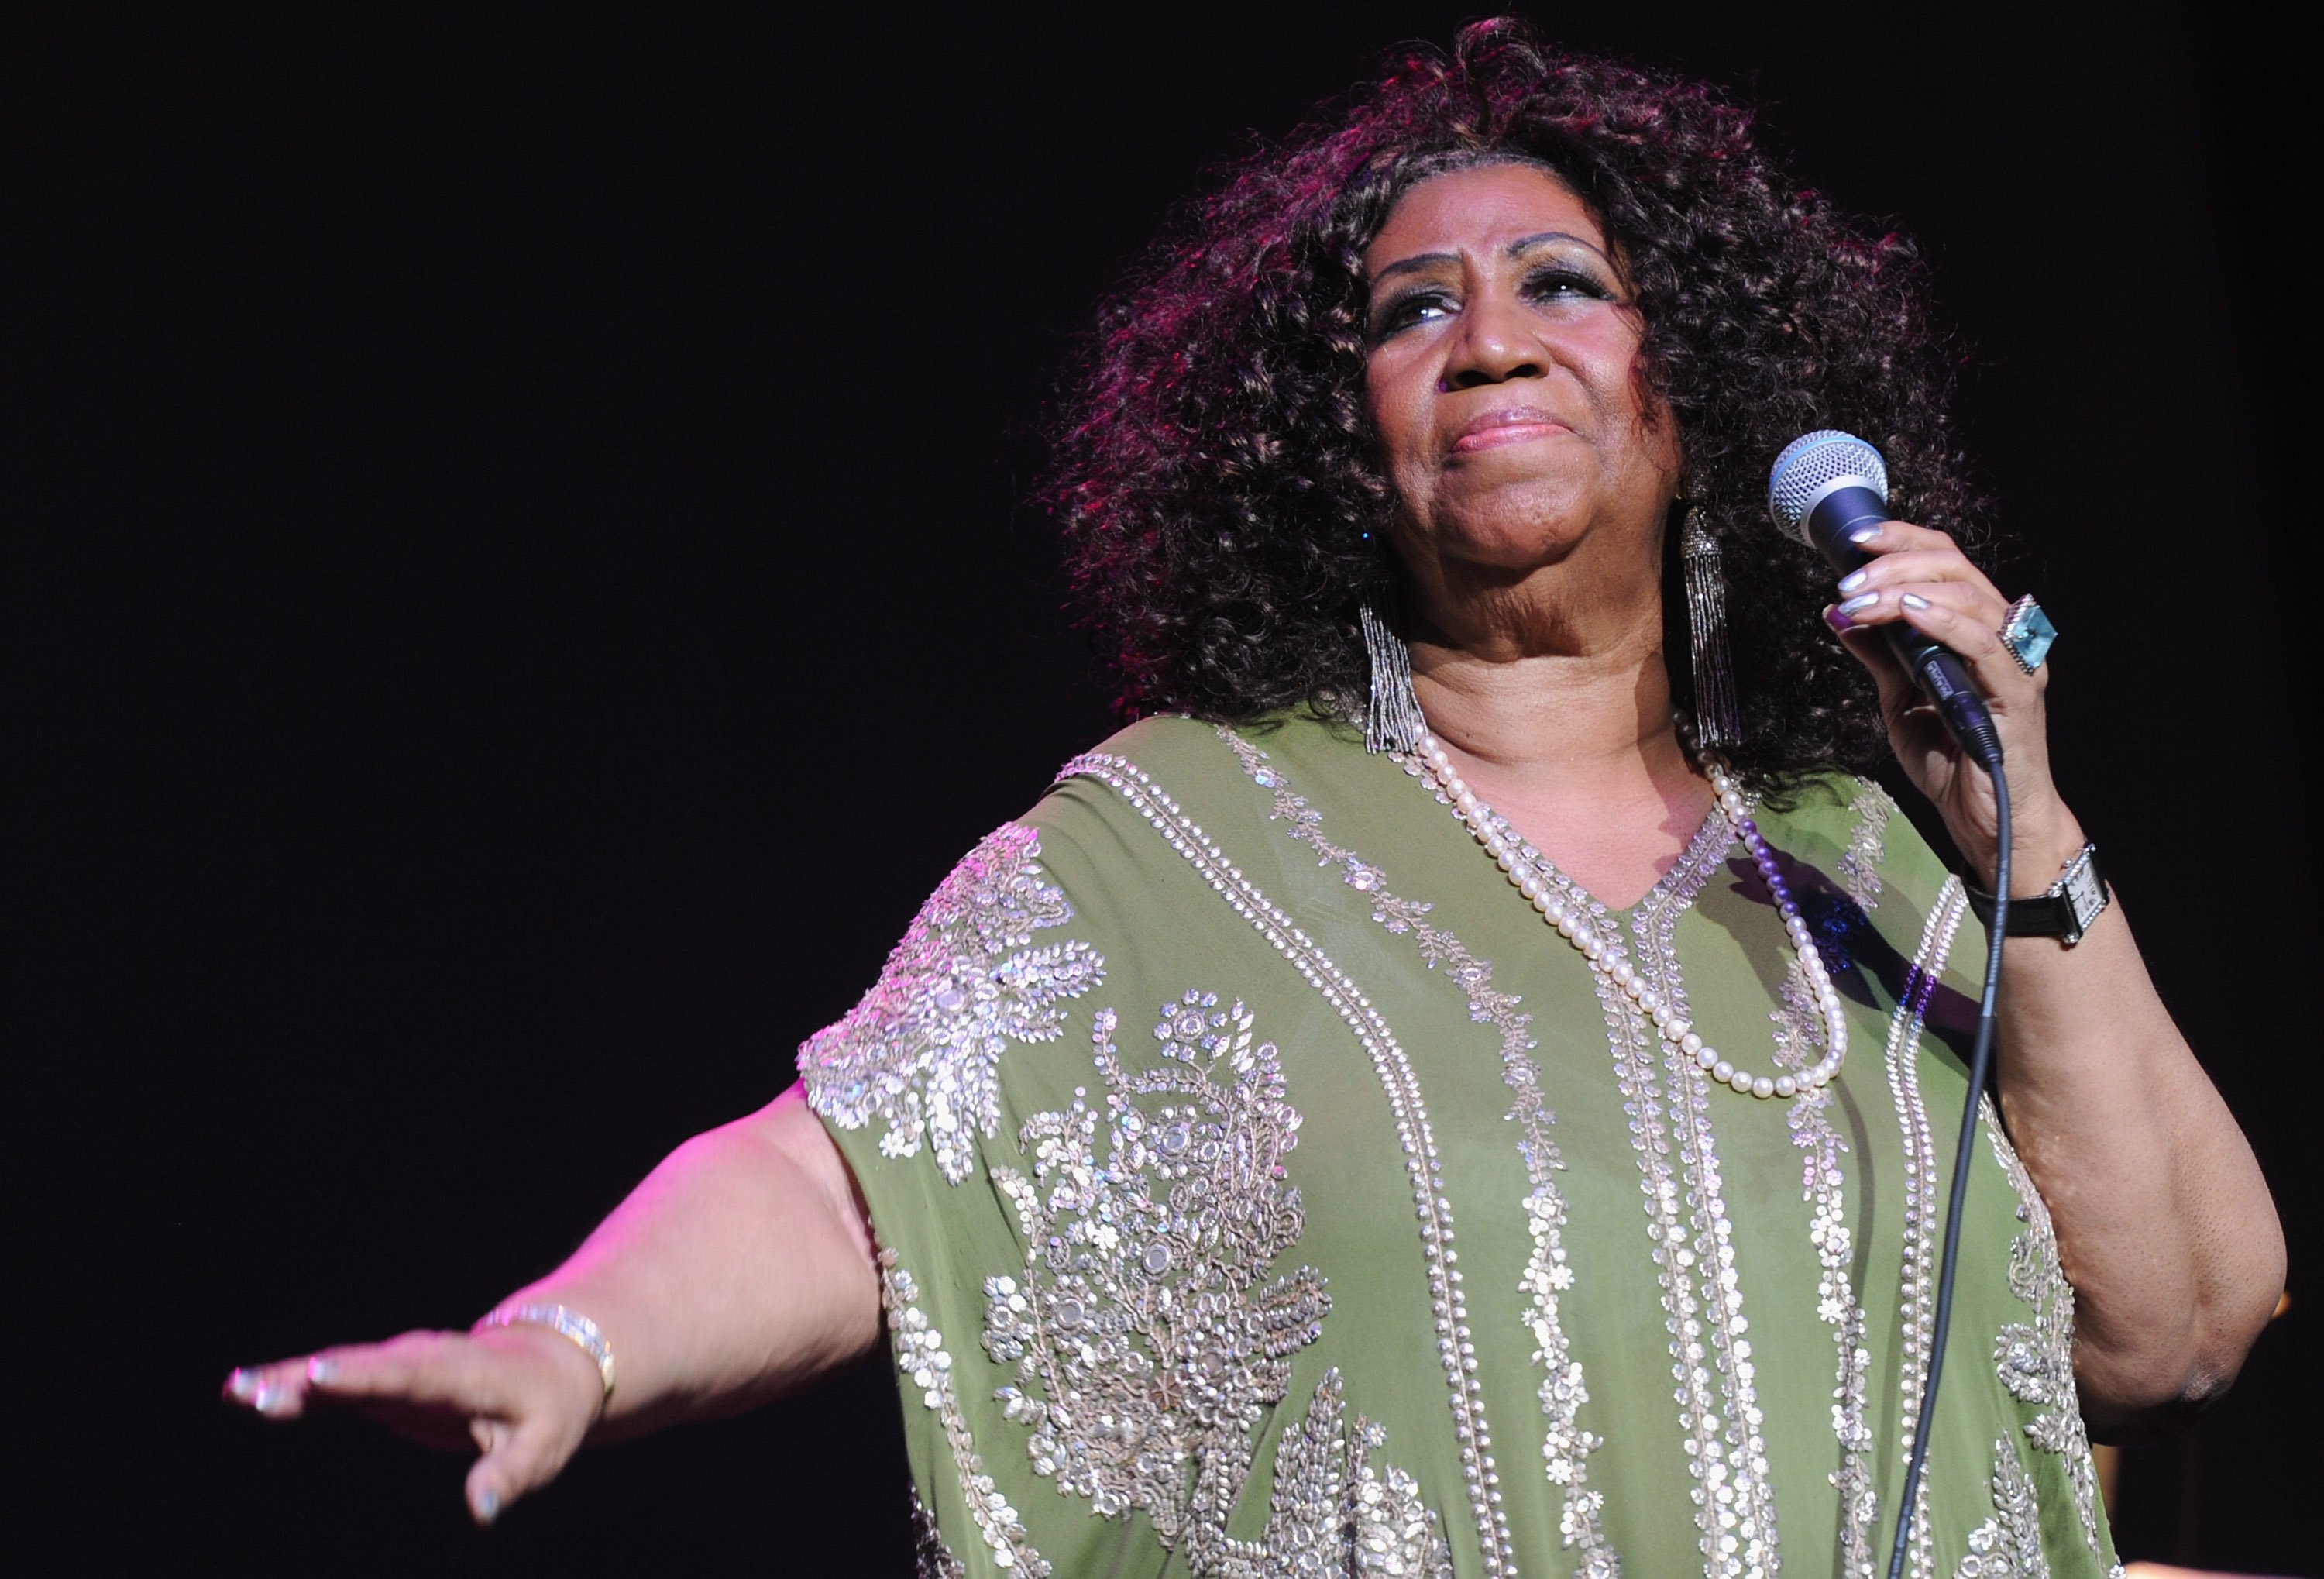 Aretha Franklin performs at The Fox Theatre on March 5, 2012 in Atlanta, Georgia | Source: Getty Images